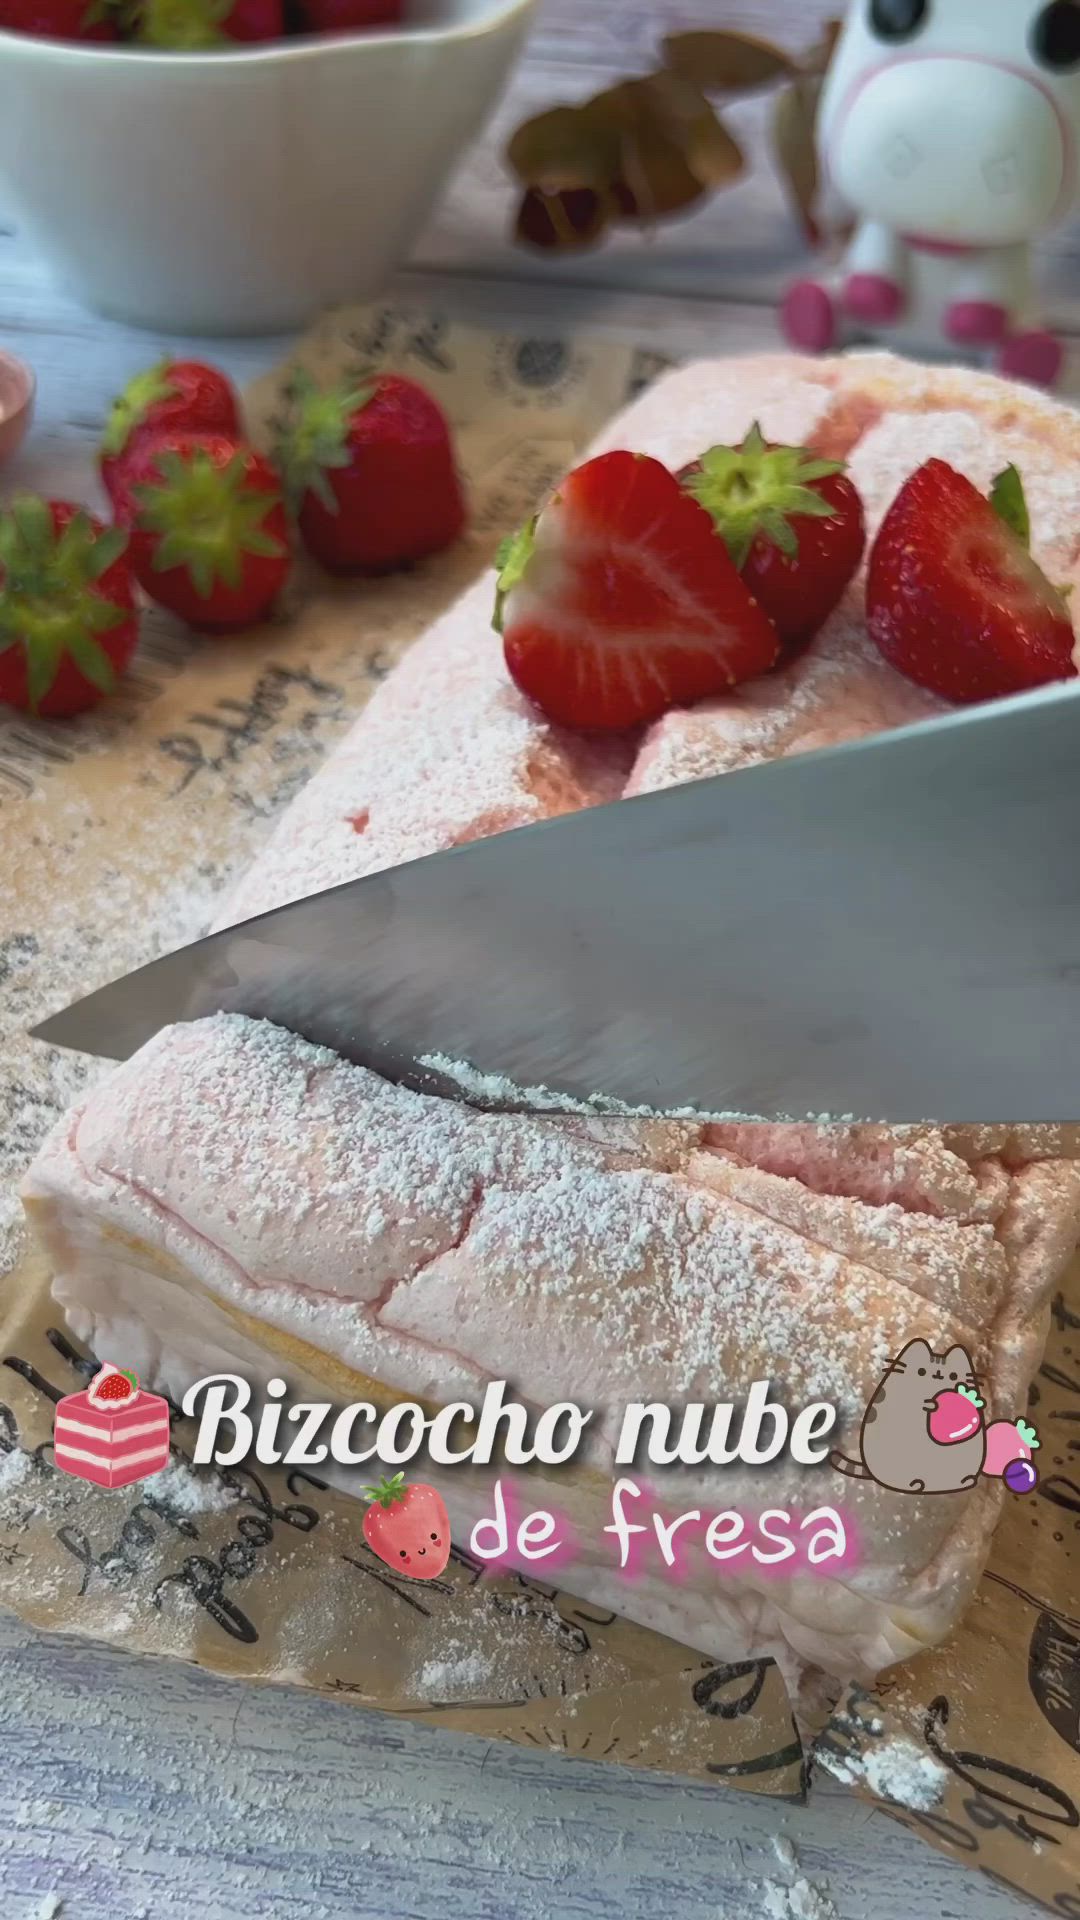 This may contain: there is a cake with strawberries on it and a knife stuck in the frosting